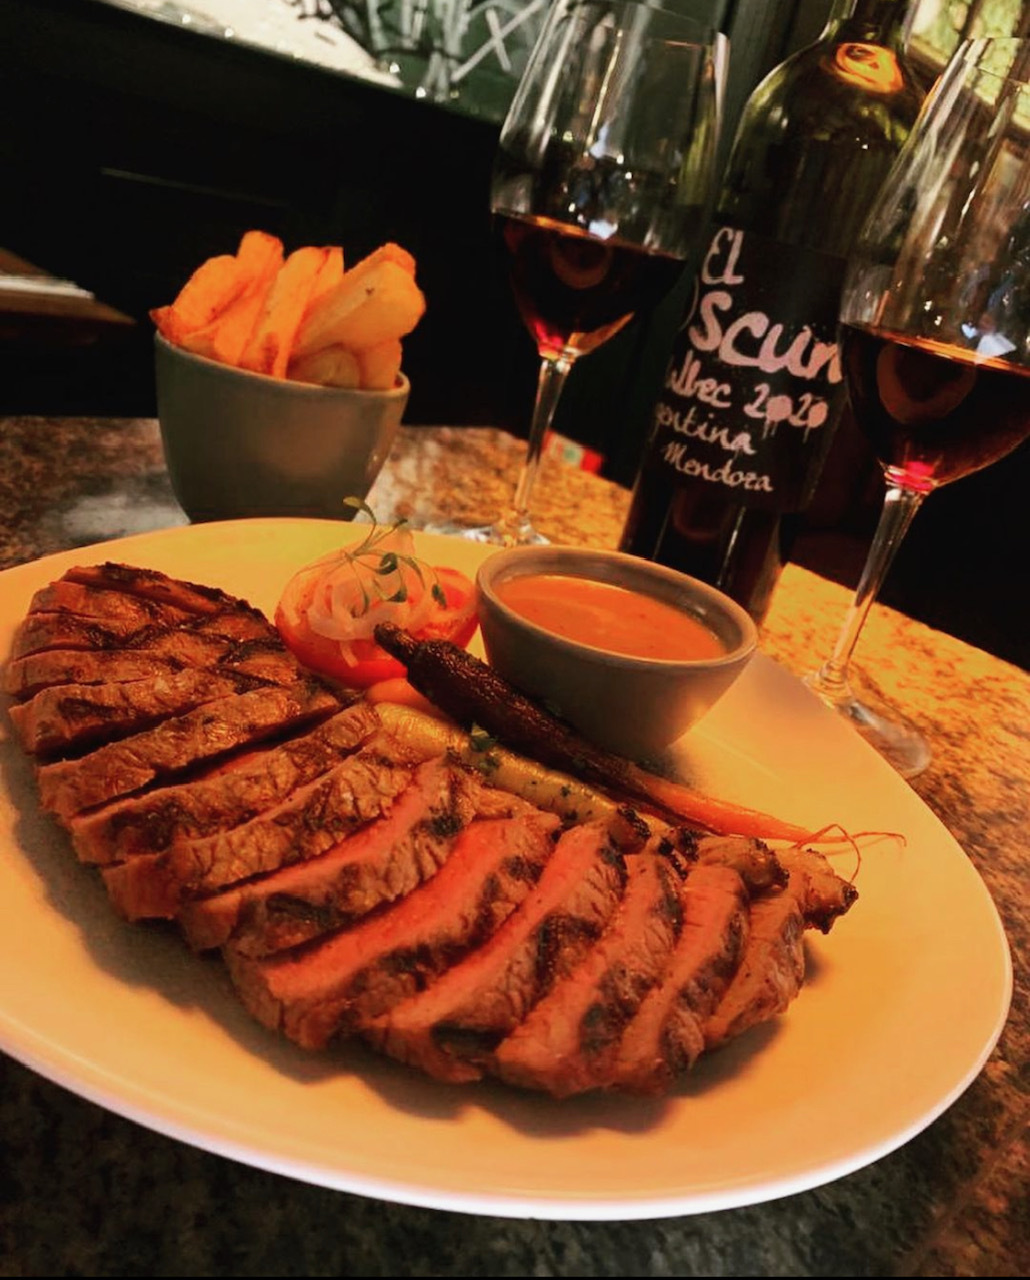 450g dry aged sirloin served with hand cut chips